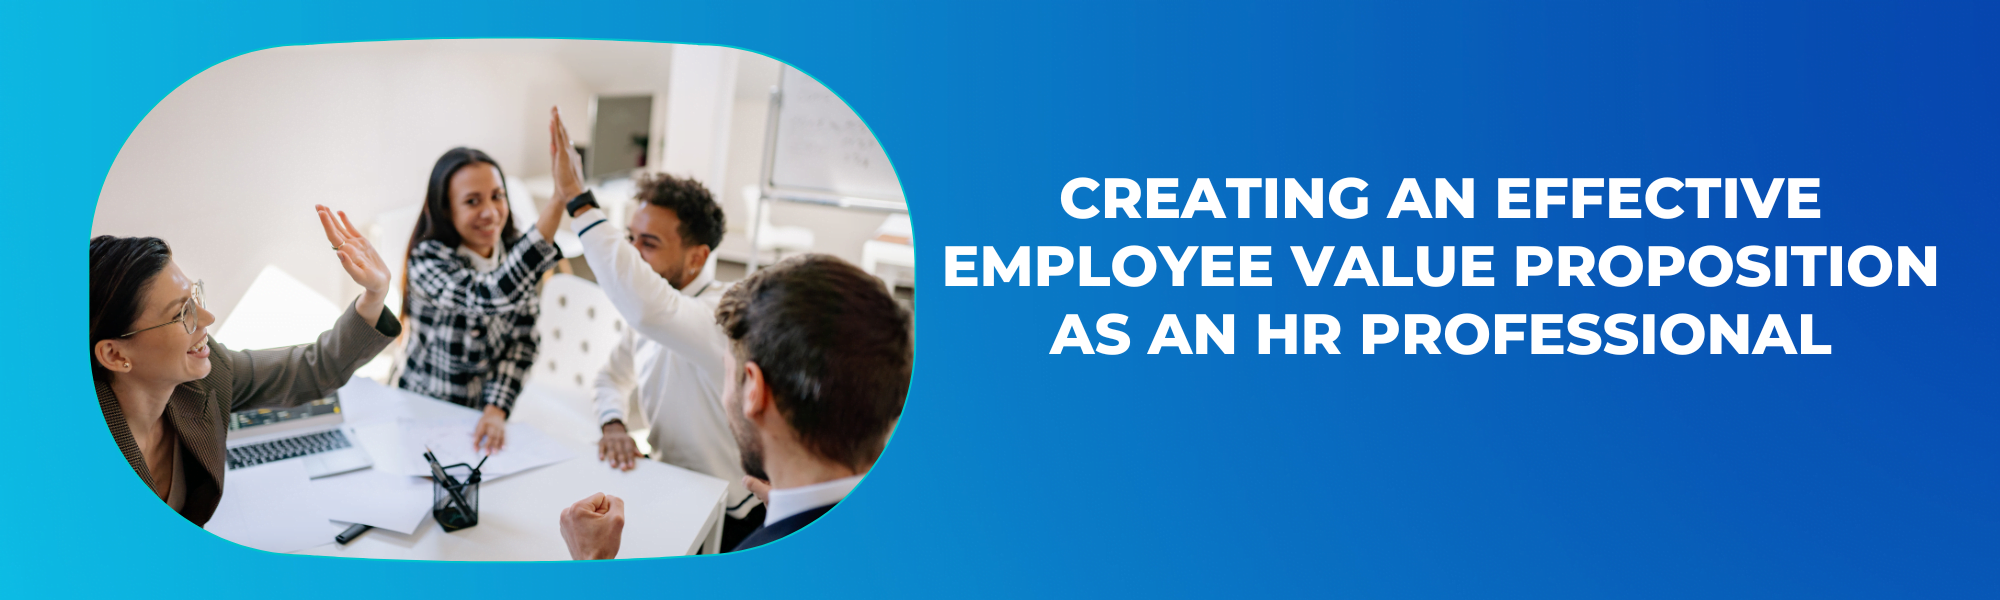 Creating an Effective Employee Value Proposition as an HR professional